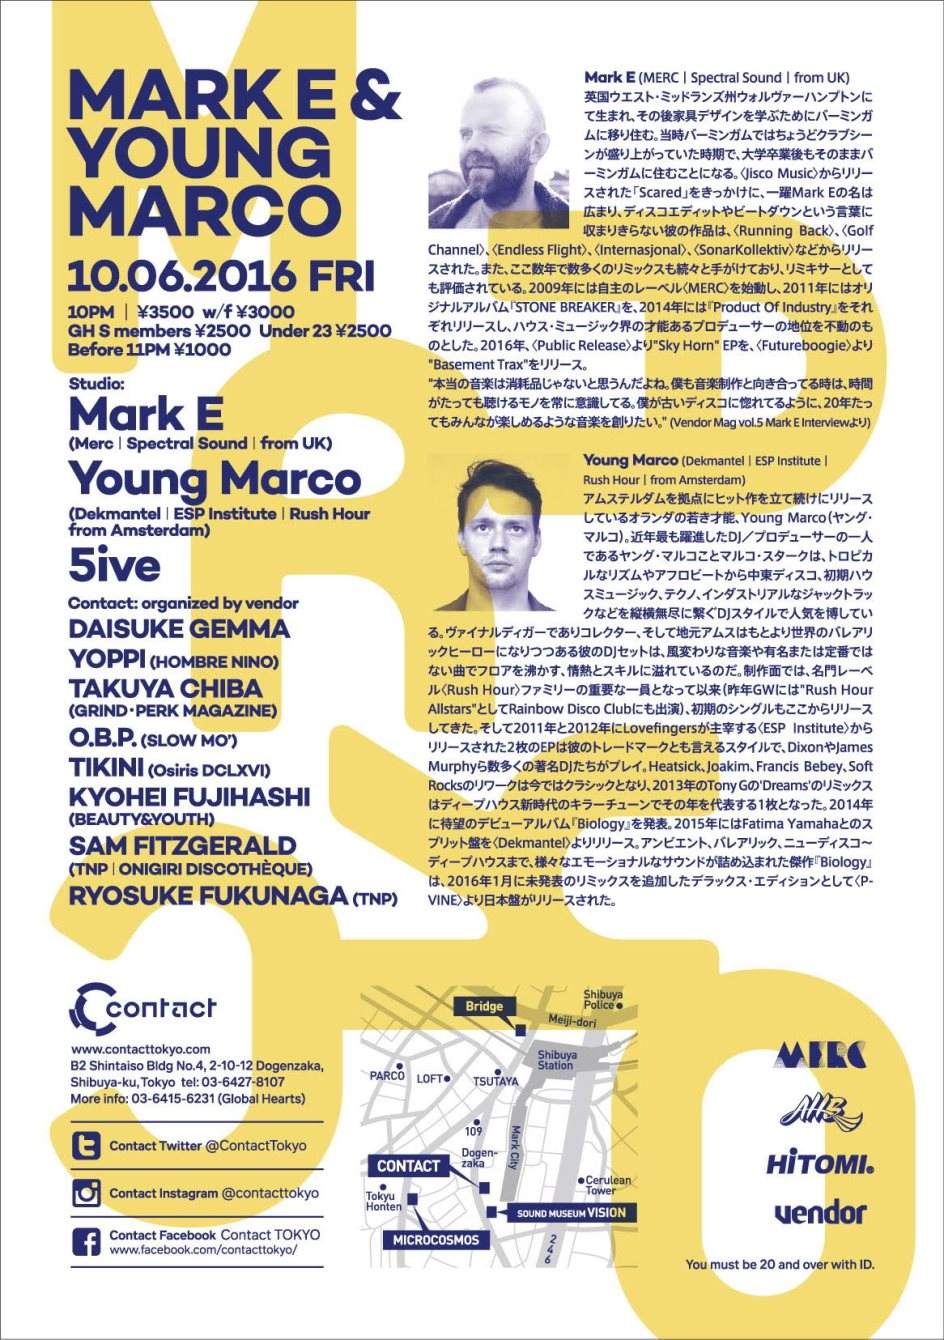 Mark E, Young Marco - フライヤー裏